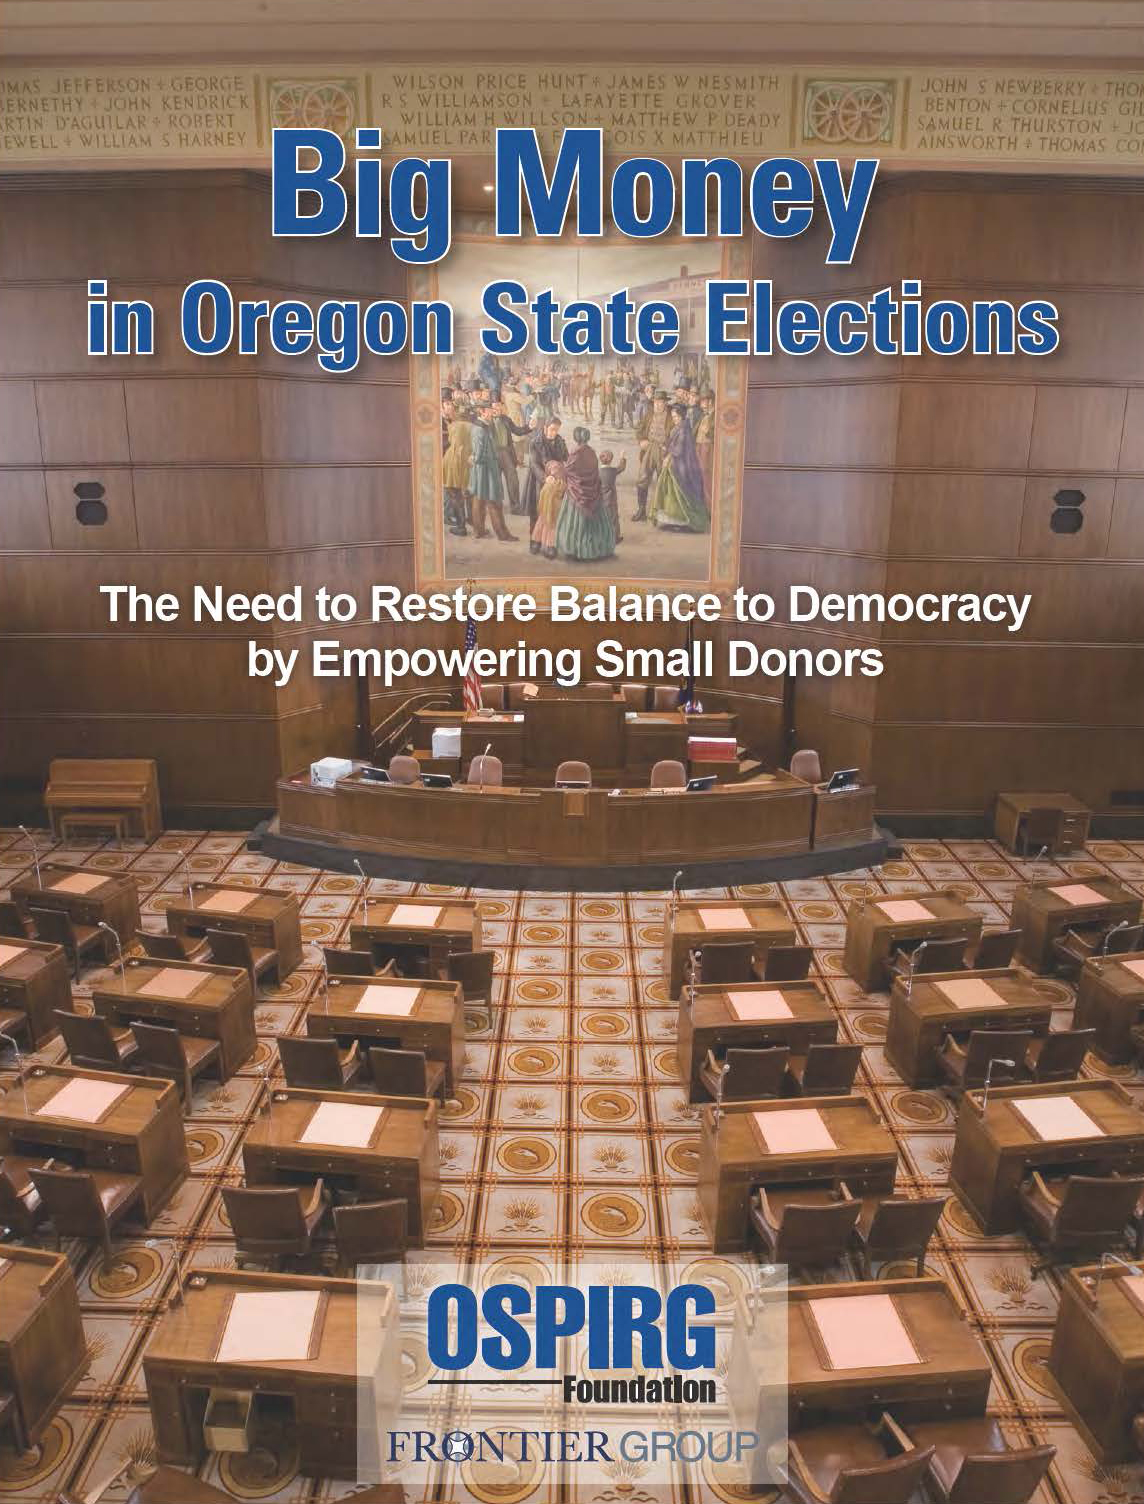 Big Money in Oregon State Elections: The Need to Restore Balance to Democracy by Empowering Small Donors - Proteus Fund